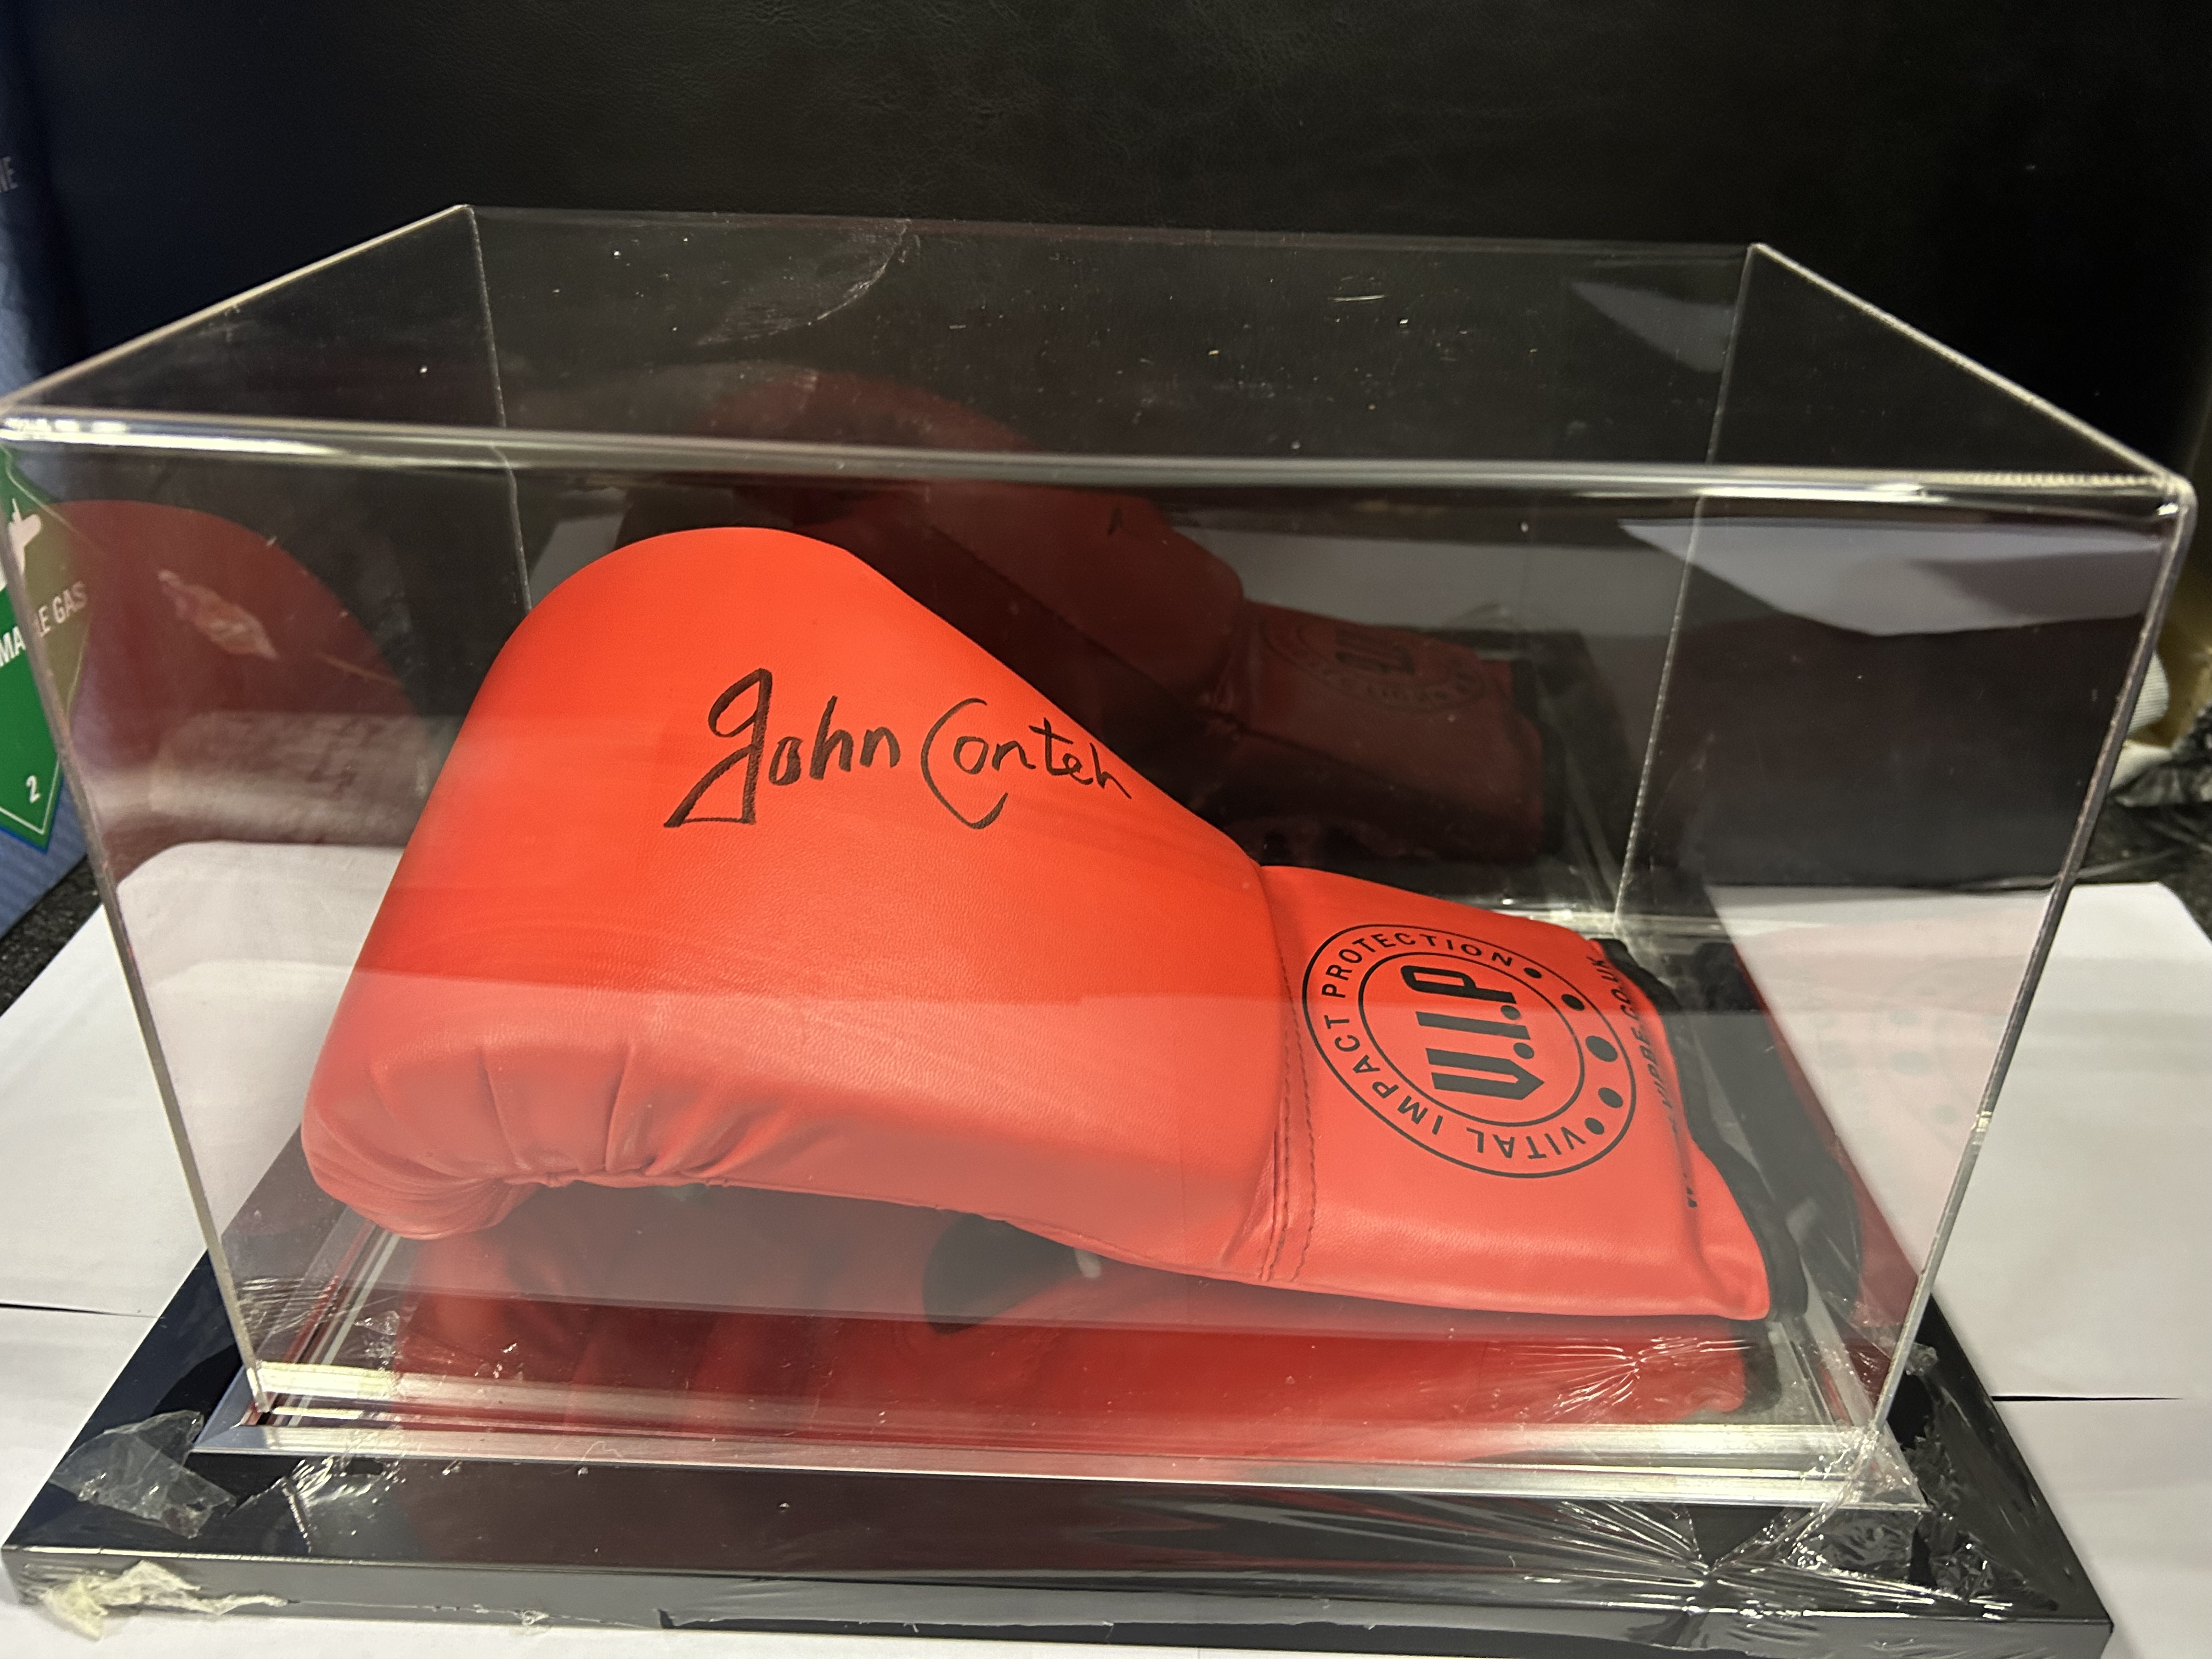 John Conteh Signed Boxing Glove In Presentation Box - Image 2 of 5